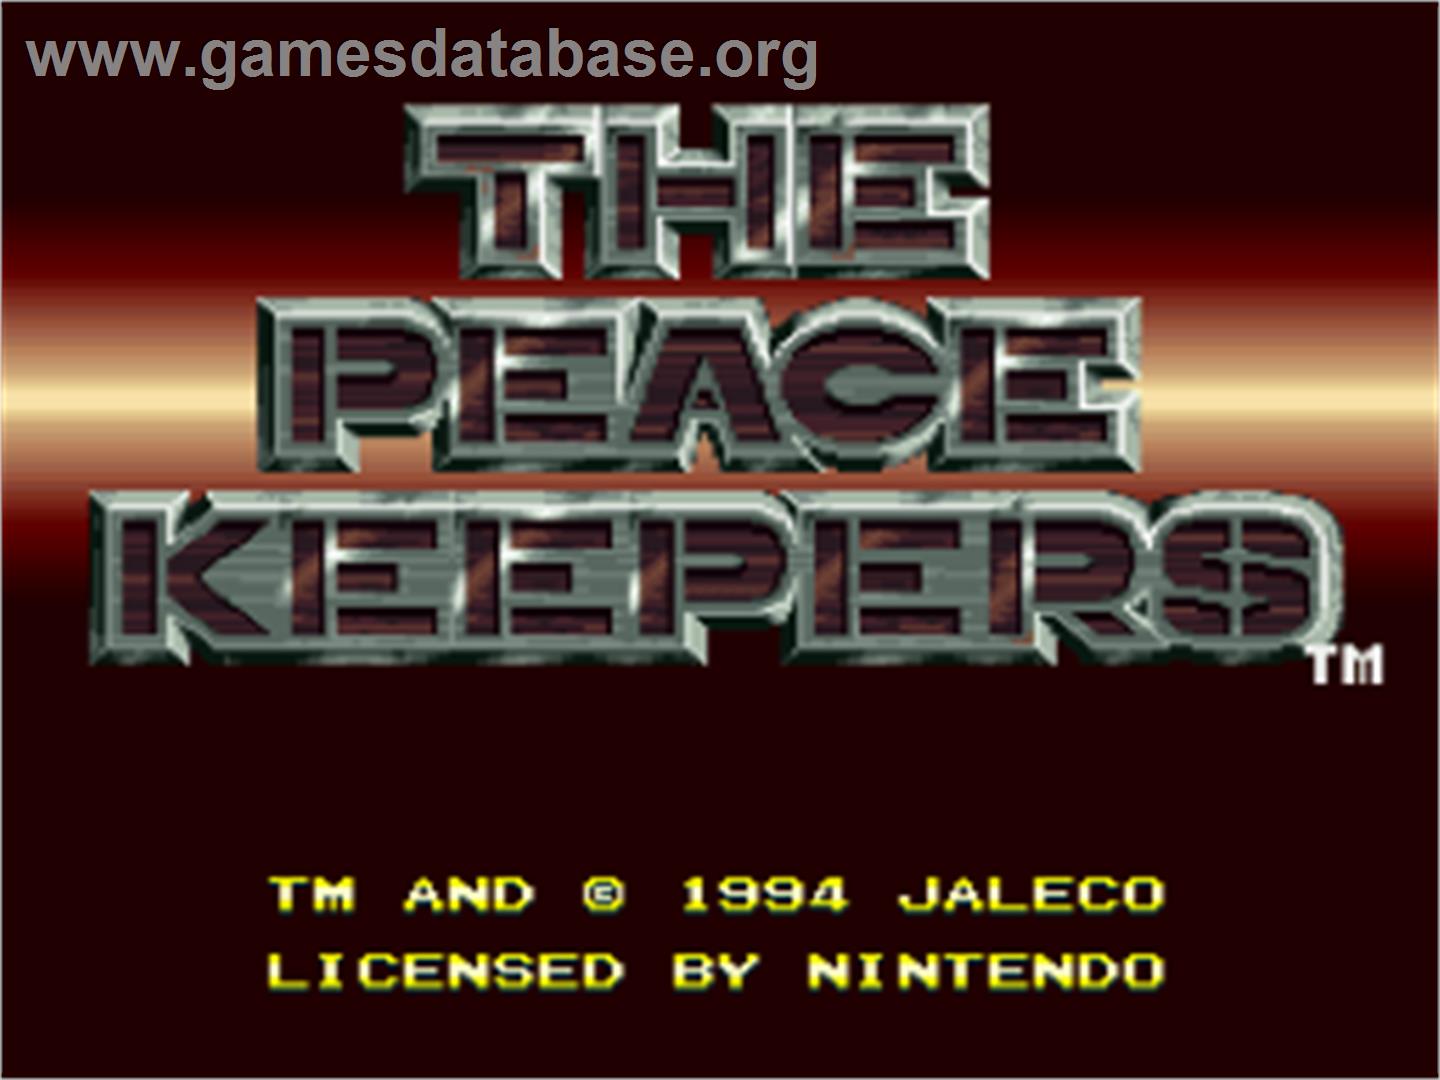 The Peace Keepers - Nintendo SNES - Artwork - Title Screen